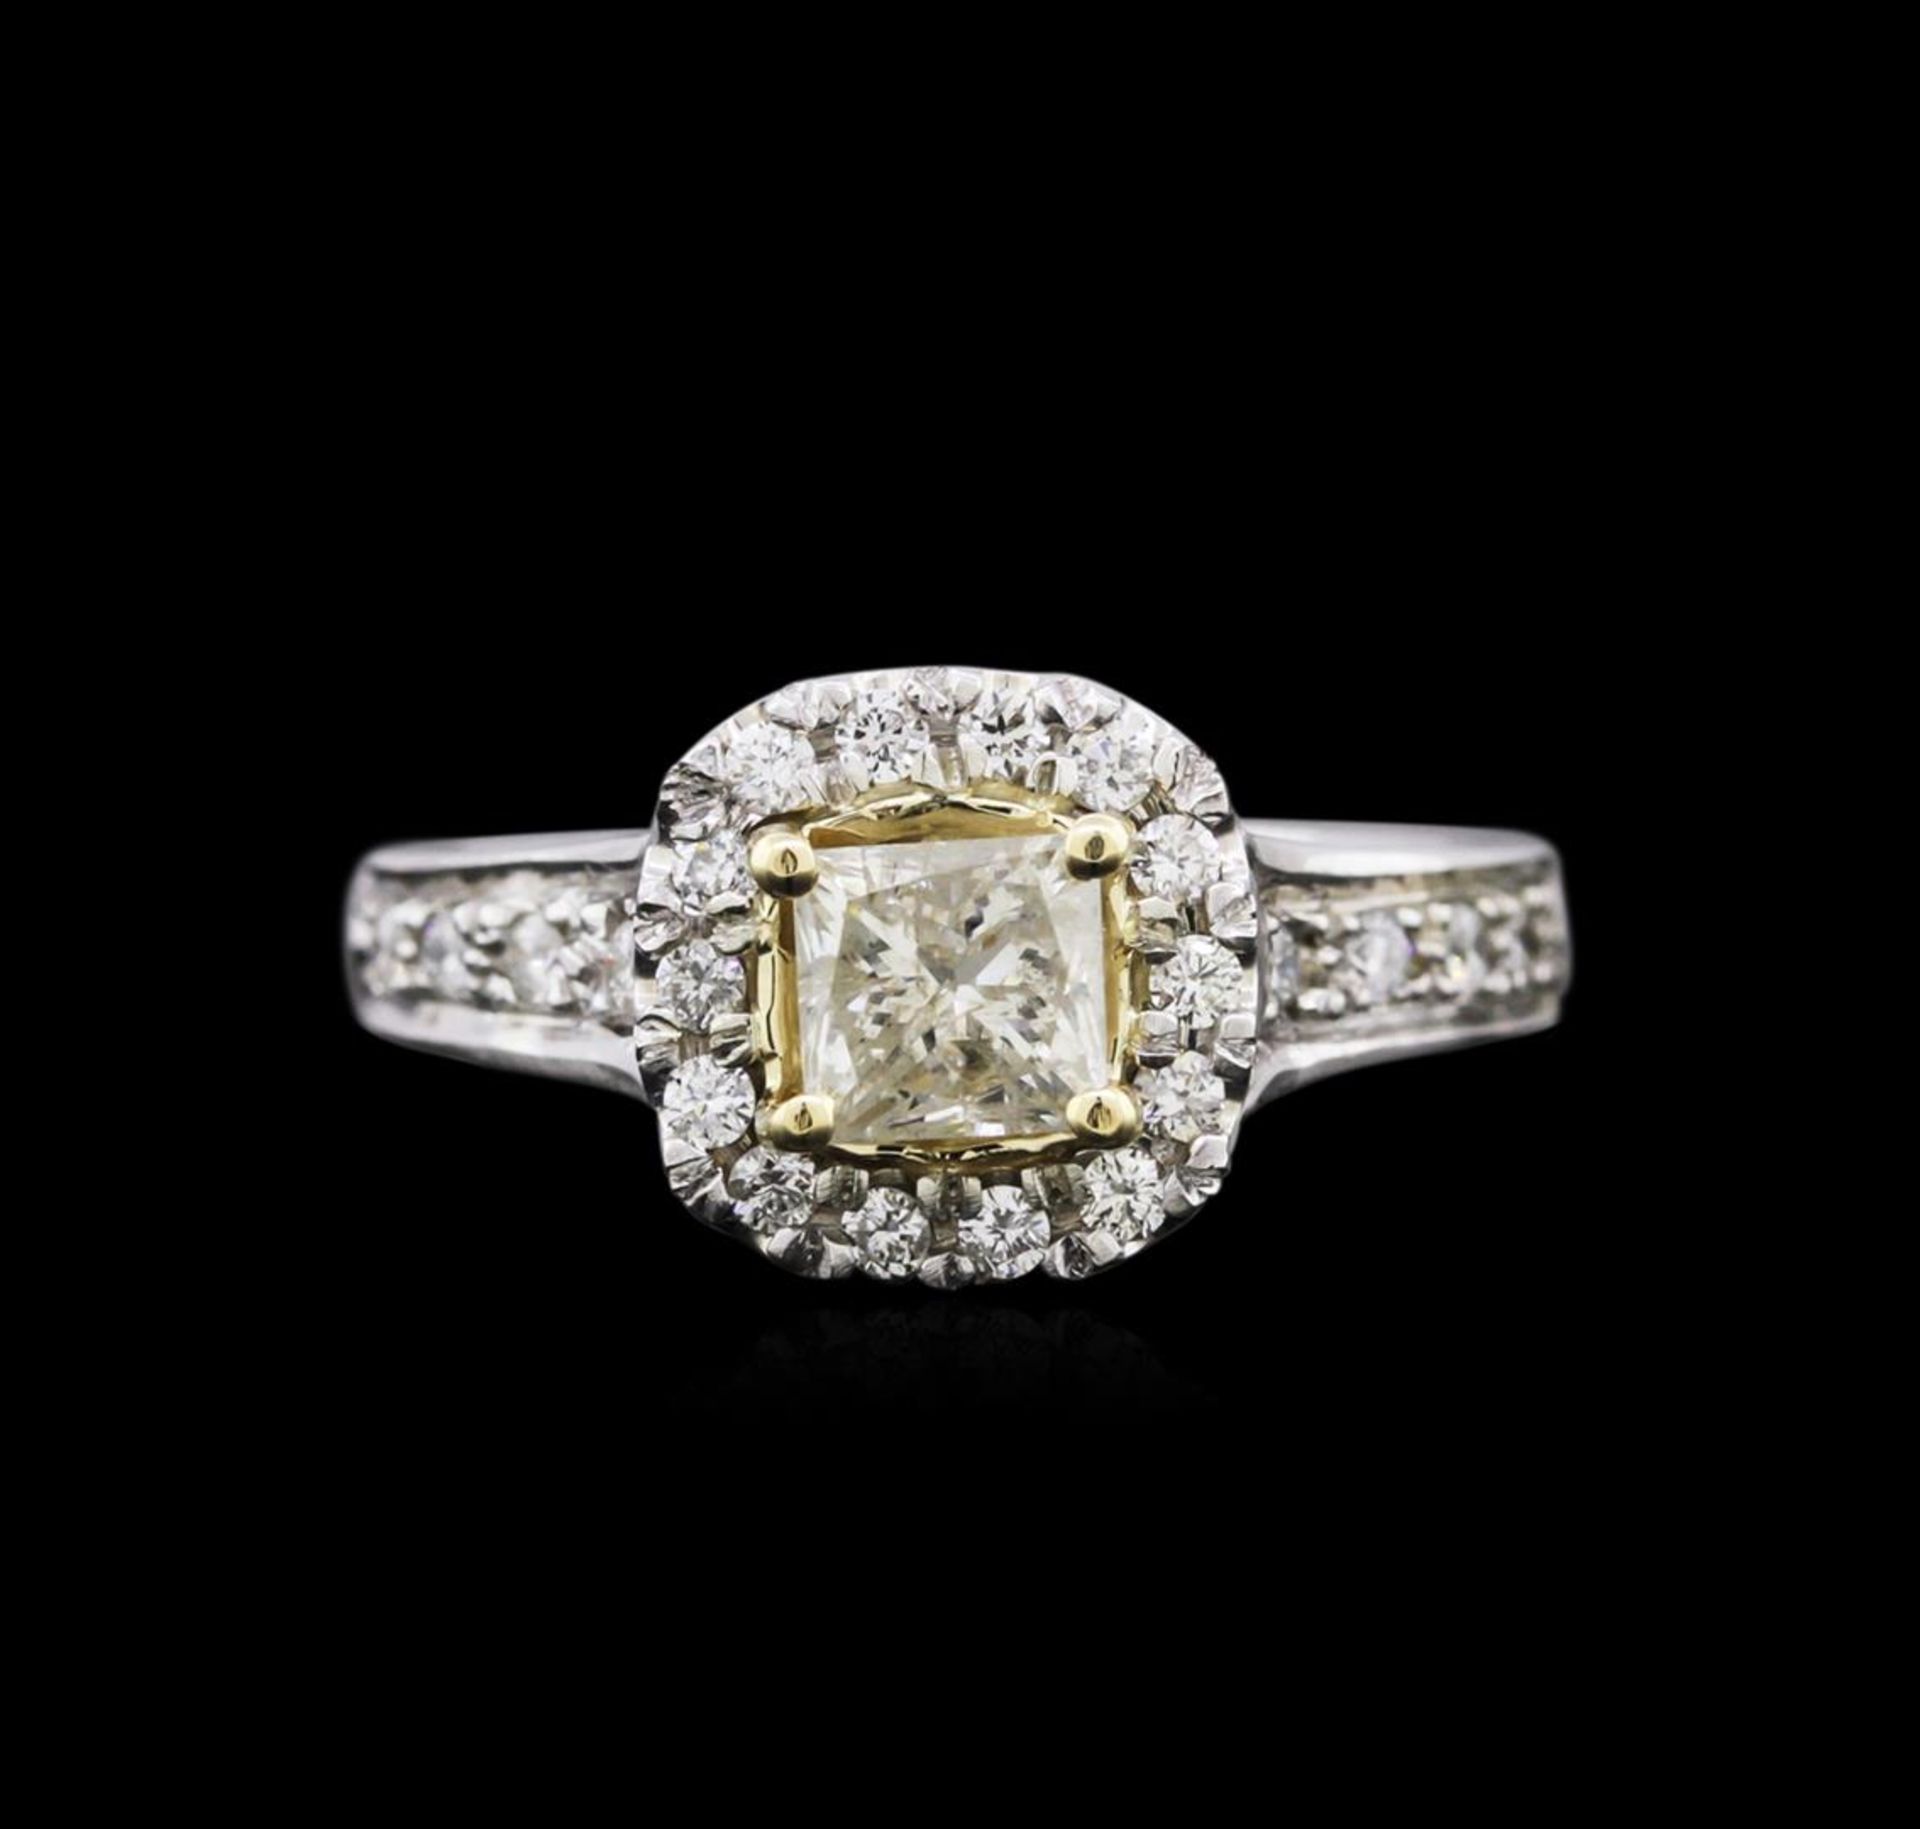 1.25 ctw Diamond Ring - 14KT Two-Tone Gold - Image 2 of 4